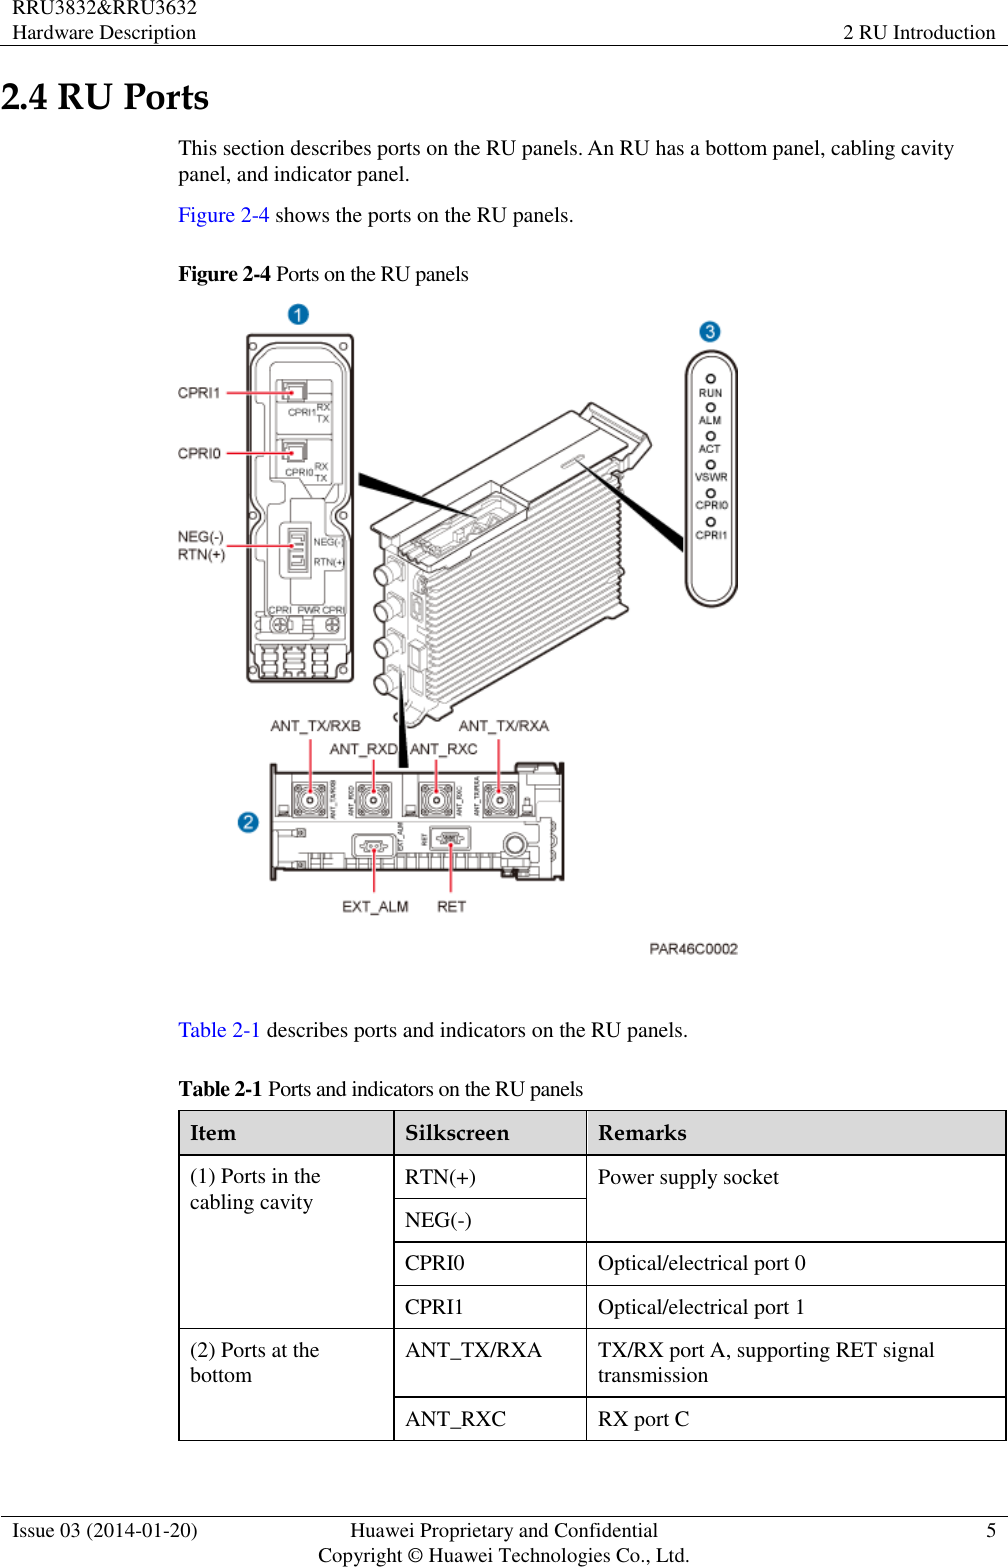 RRU3832&amp;RRU3632 Hardware Description 2 RU Introduction  Issue 03 (2014-01-20) Huawei Proprietary and Confidential                                     Copyright © Huawei Technologies Co., Ltd. 5  2.4 RU Ports This section describes ports on the RU panels. An RU has a bottom panel, cabling cavity panel, and indicator panel. Figure 2-4 shows the ports on the RU panels. Figure 2-4 Ports on the RU panels   Table 2-1 describes ports and indicators on the RU panels. Table 2-1 Ports and indicators on the RU panels Item Silkscreen Remarks (1) Ports in the cabling cavity RTN(+) Power supply socket NEG(-) CPRI0 Optical/electrical port 0 CPRI1 Optical/electrical port 1 (2) Ports at the bottom ANT_TX/RXA TX/RX port A, supporting RET signal transmission ANT_RXC RX port C 